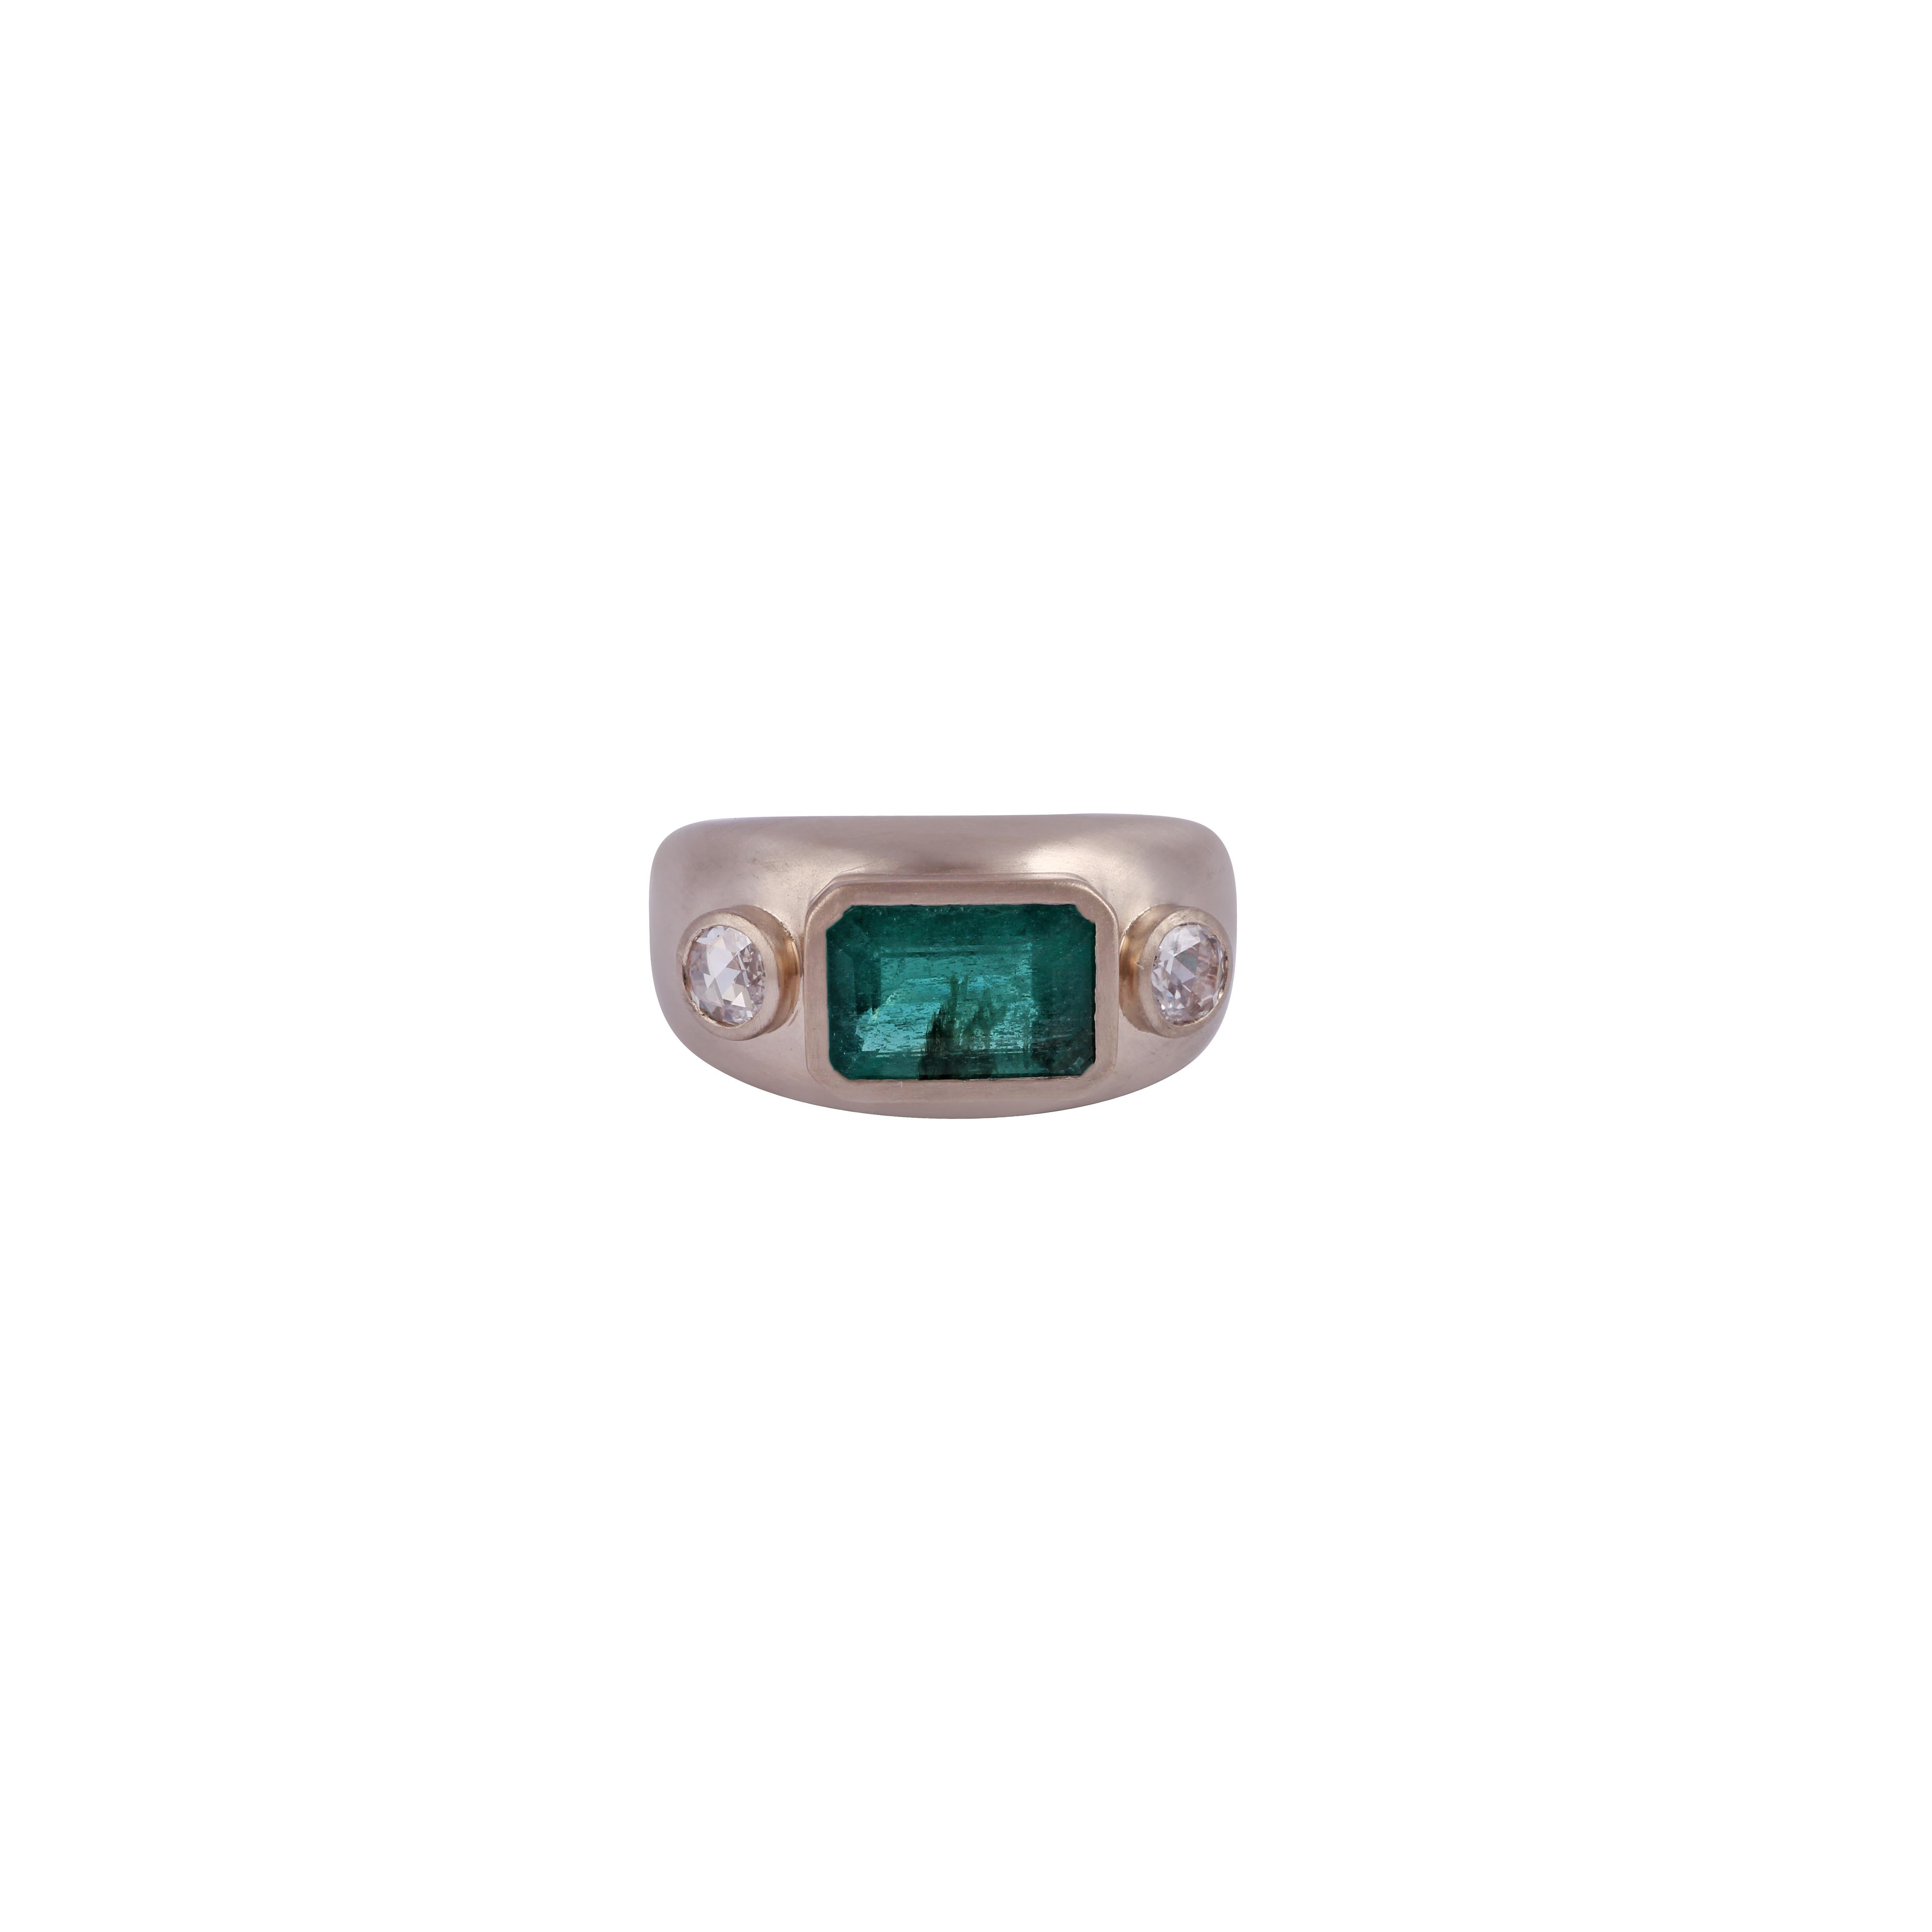 Magnificent  Emerald ring.  
 Emerald & Diamond Ring 18K Yellow Gold 

 Emerald - 3.04 Carat
Diamond - 0.29 Carat
18 Karat  Gold




Custom Services
Resizing is available.
Request Customization
